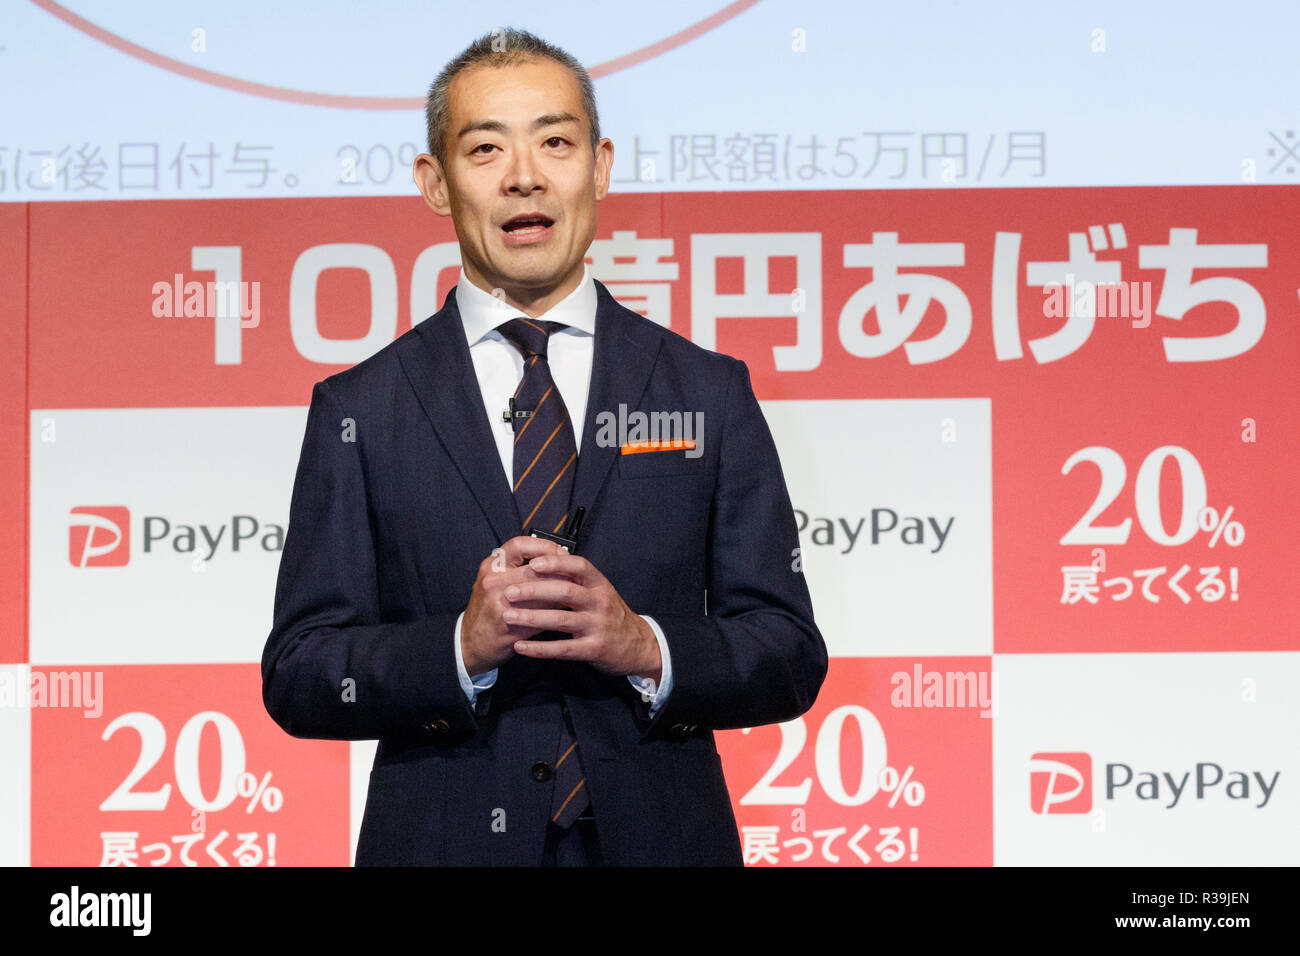 Ichiro Nakayama, president and CEO of PayPay Corp. speaks during a news conference to announce the new smartphone payment service ''PayPay'' on November 22, 2018, Tokyo, Japan. PayPay is a smartphone payment service using barcodes (QR codes) supported by SoftBank, Yahoo Japan and Paytm, that can be used in Japanese stores including Bic Camera, Yamada Denki and Family Mart. Credit: Rodrigo Reyes Marin/AFLO/Alamy Live News Stock Photo